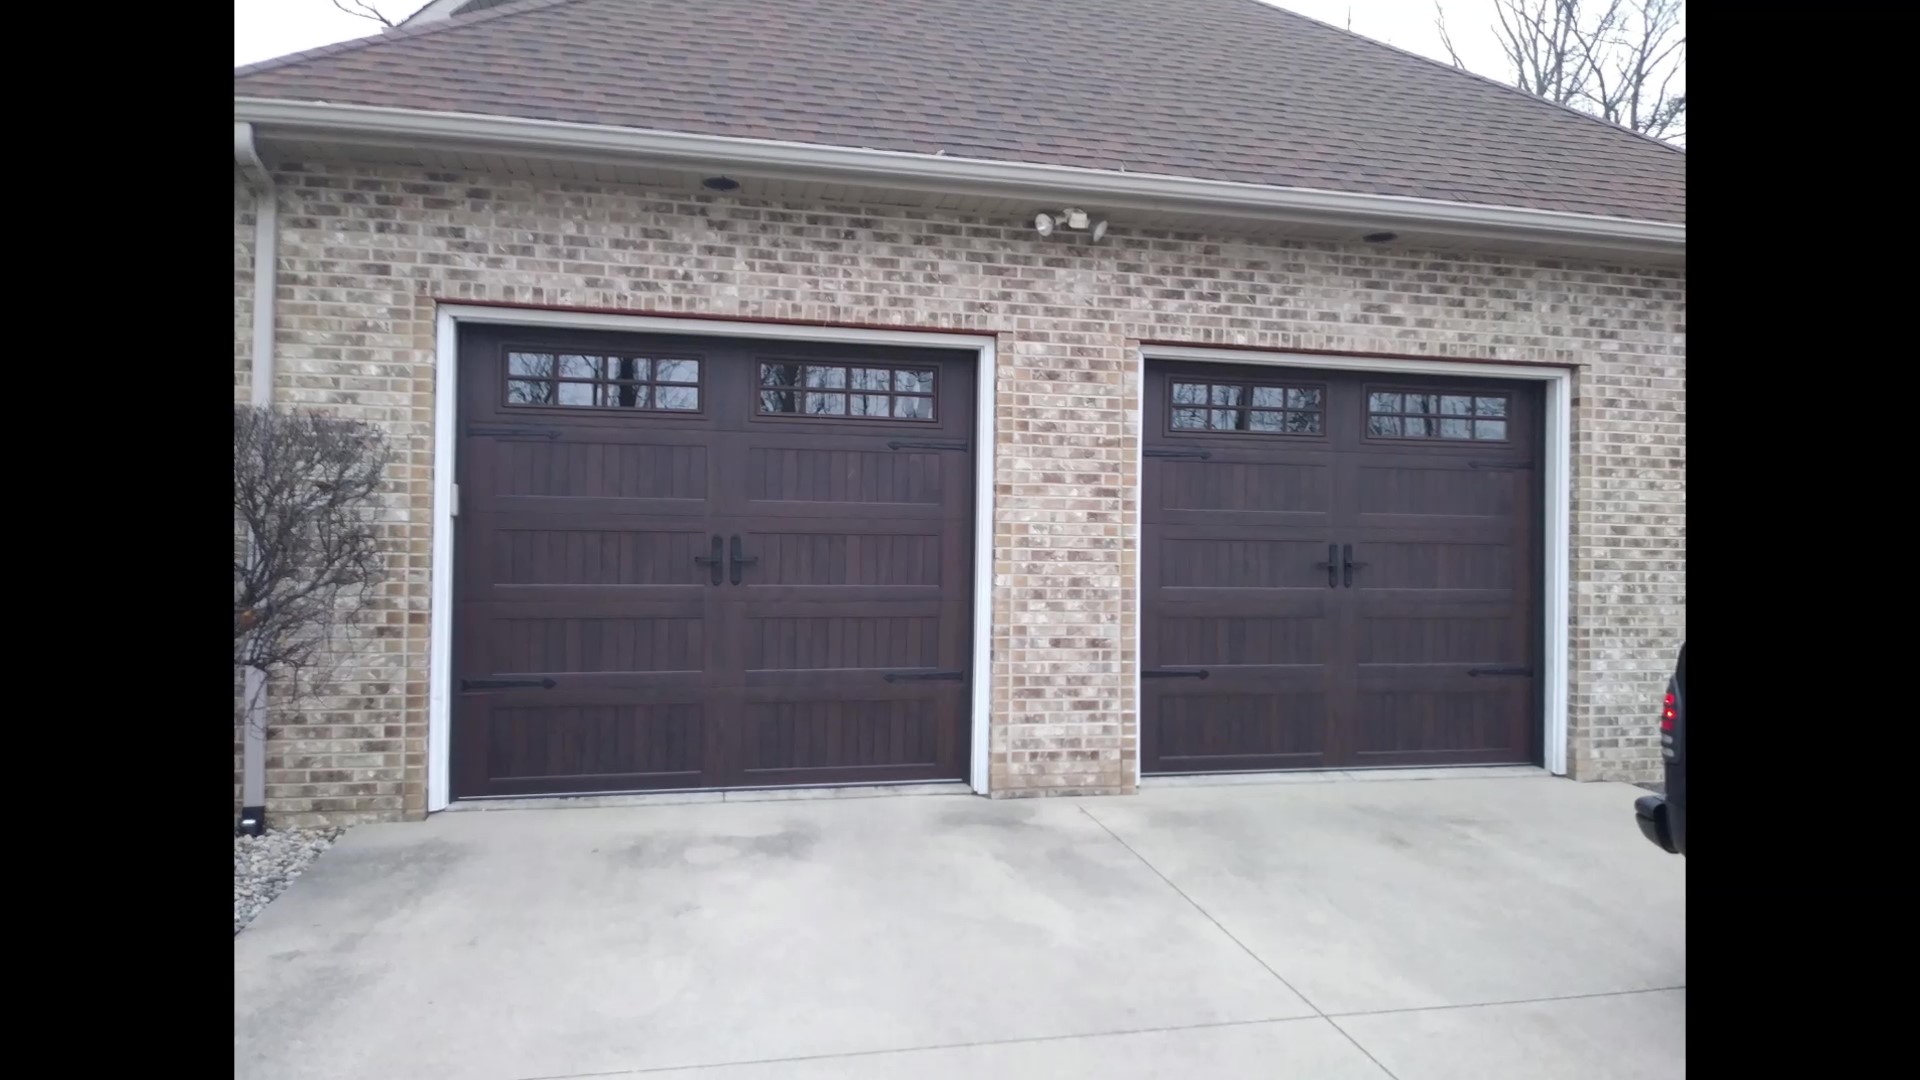 5 Signs You Need To Contact A Garage Door Repair Company in Fort Wayne.